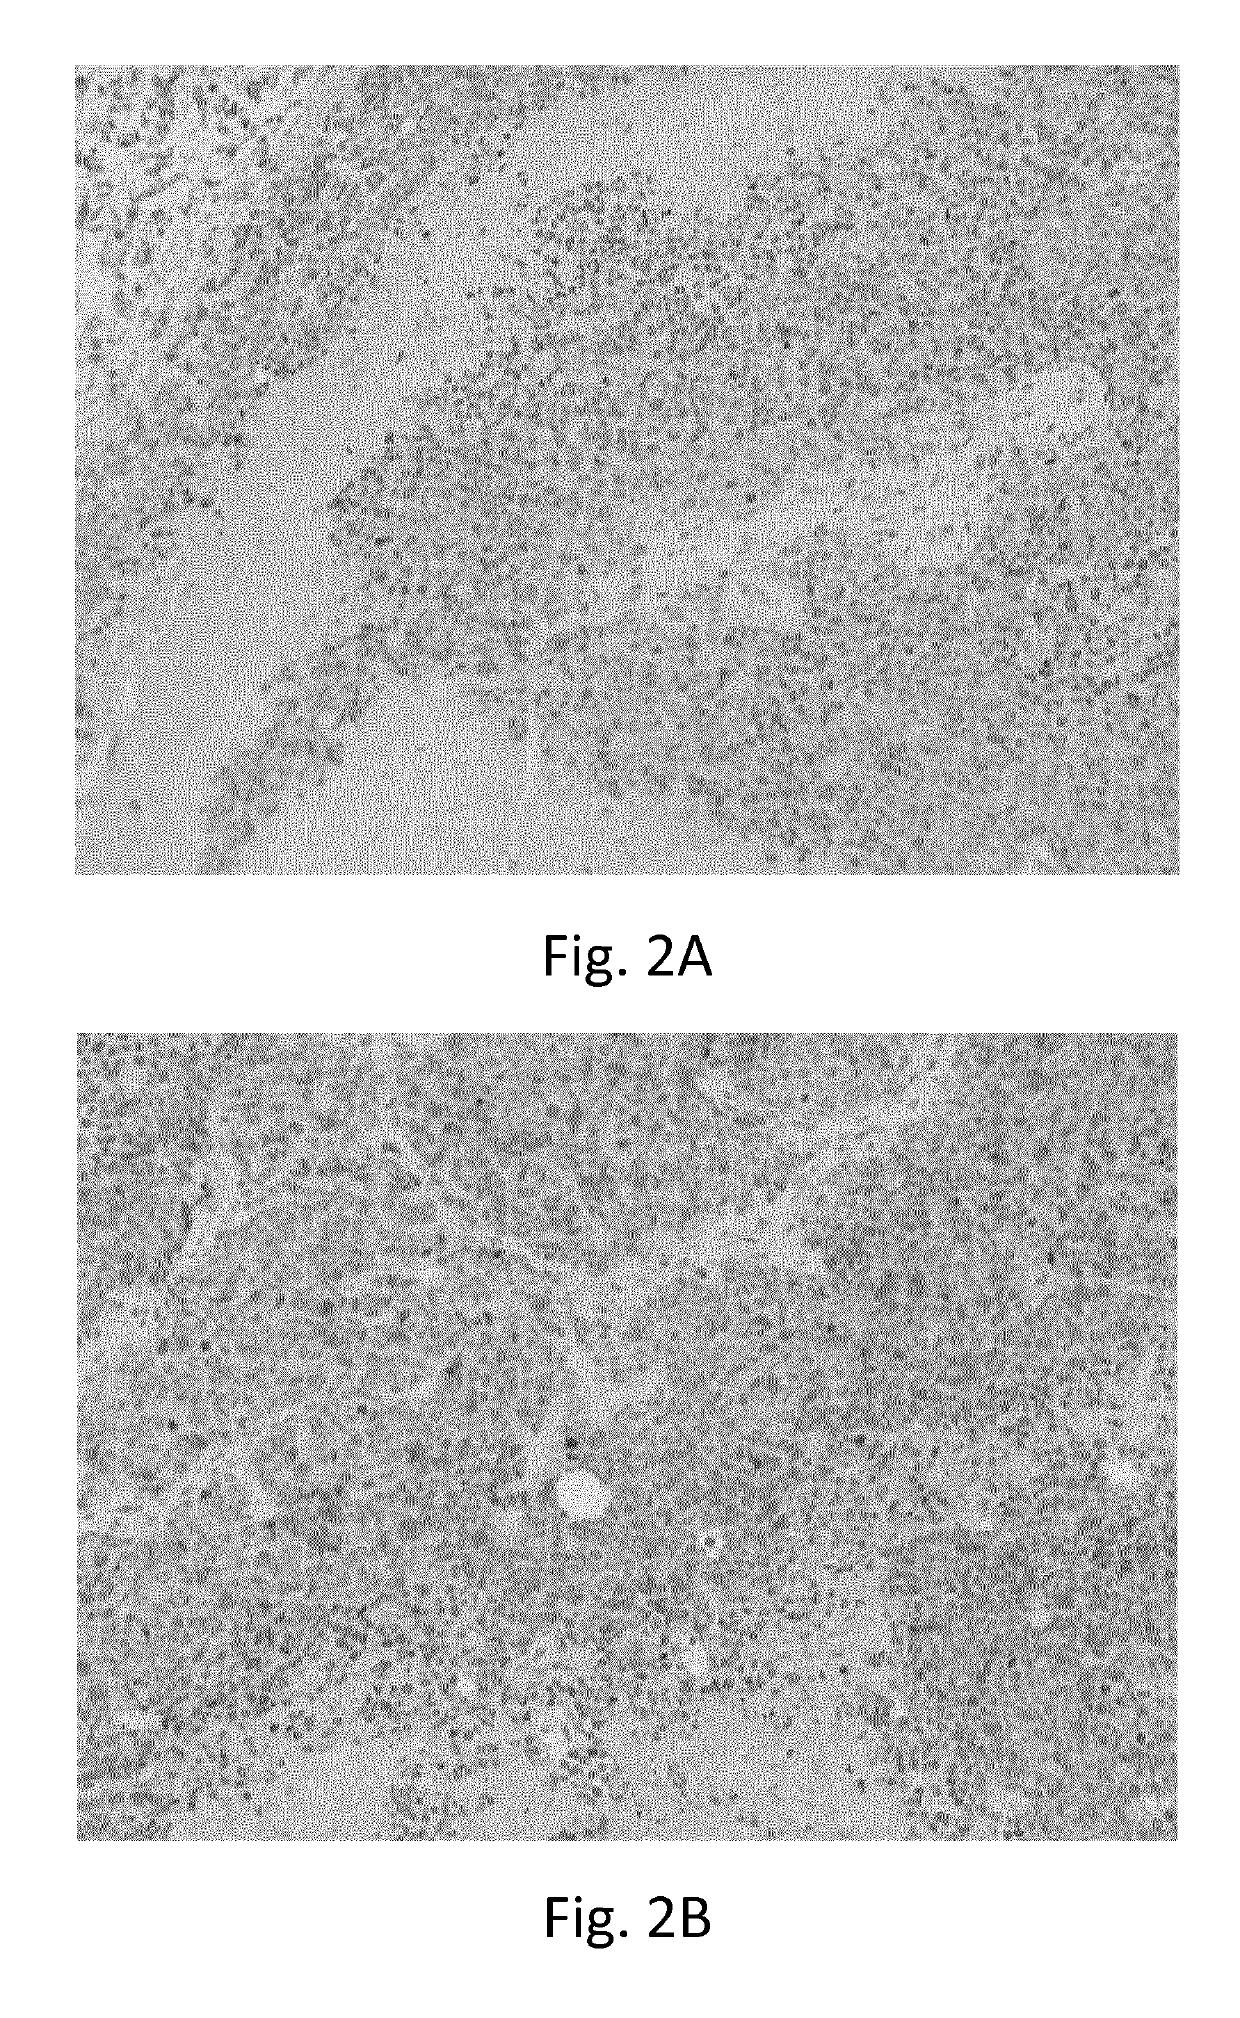 Combination therapy comprising an inflammatory immunocytokine and a chimeric antigen receptor (CAR)-t cell